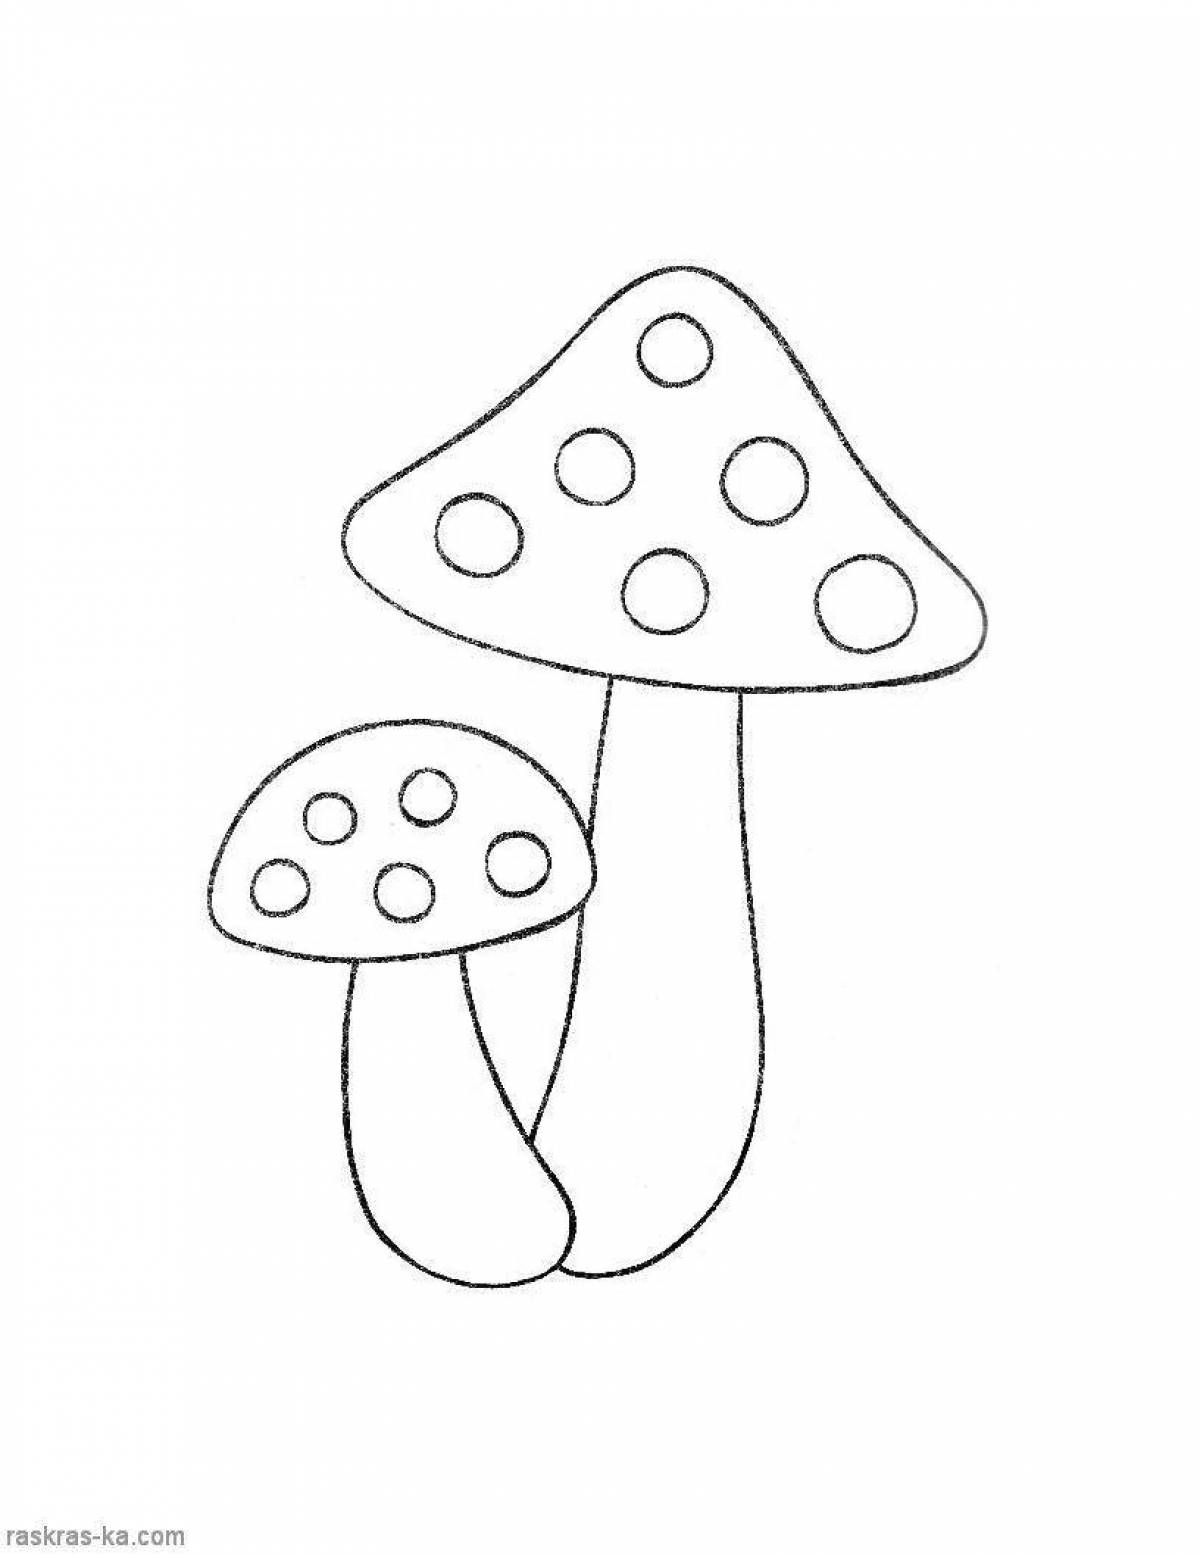 Exquisite fly agaric coloring book for kids